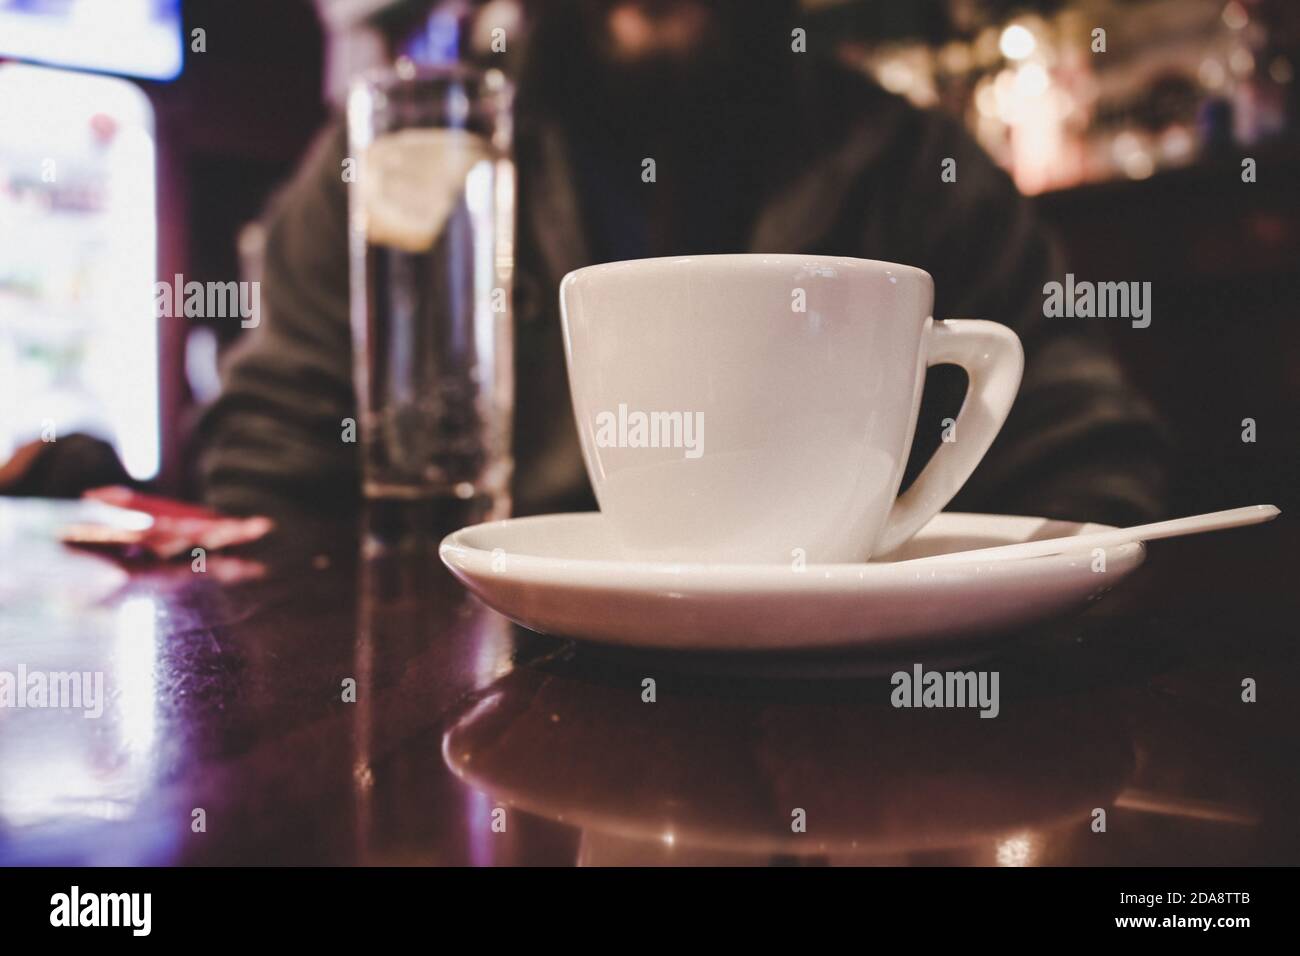 A cup full of coffee or tea on the wooden table in a bar. A man and a glass of mineral water in the background. Stock Photo